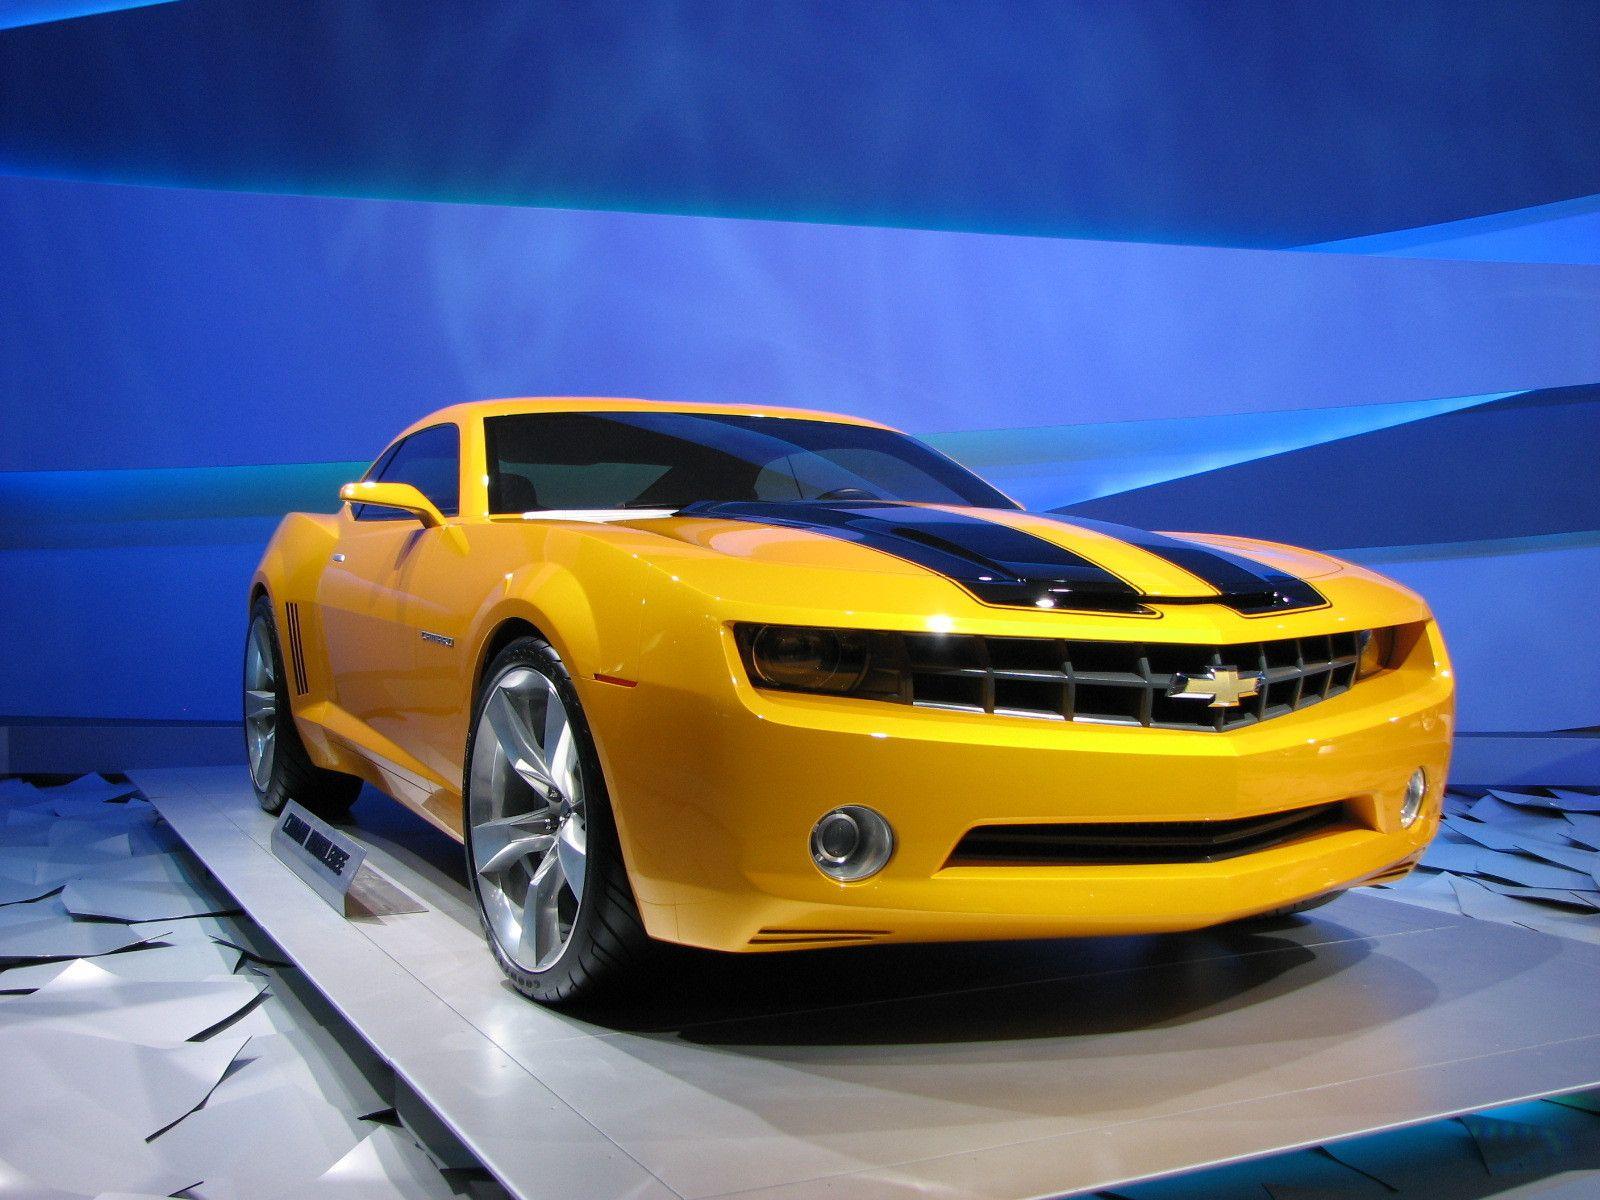 Transformers image the real bumblebee car HD wallpaper